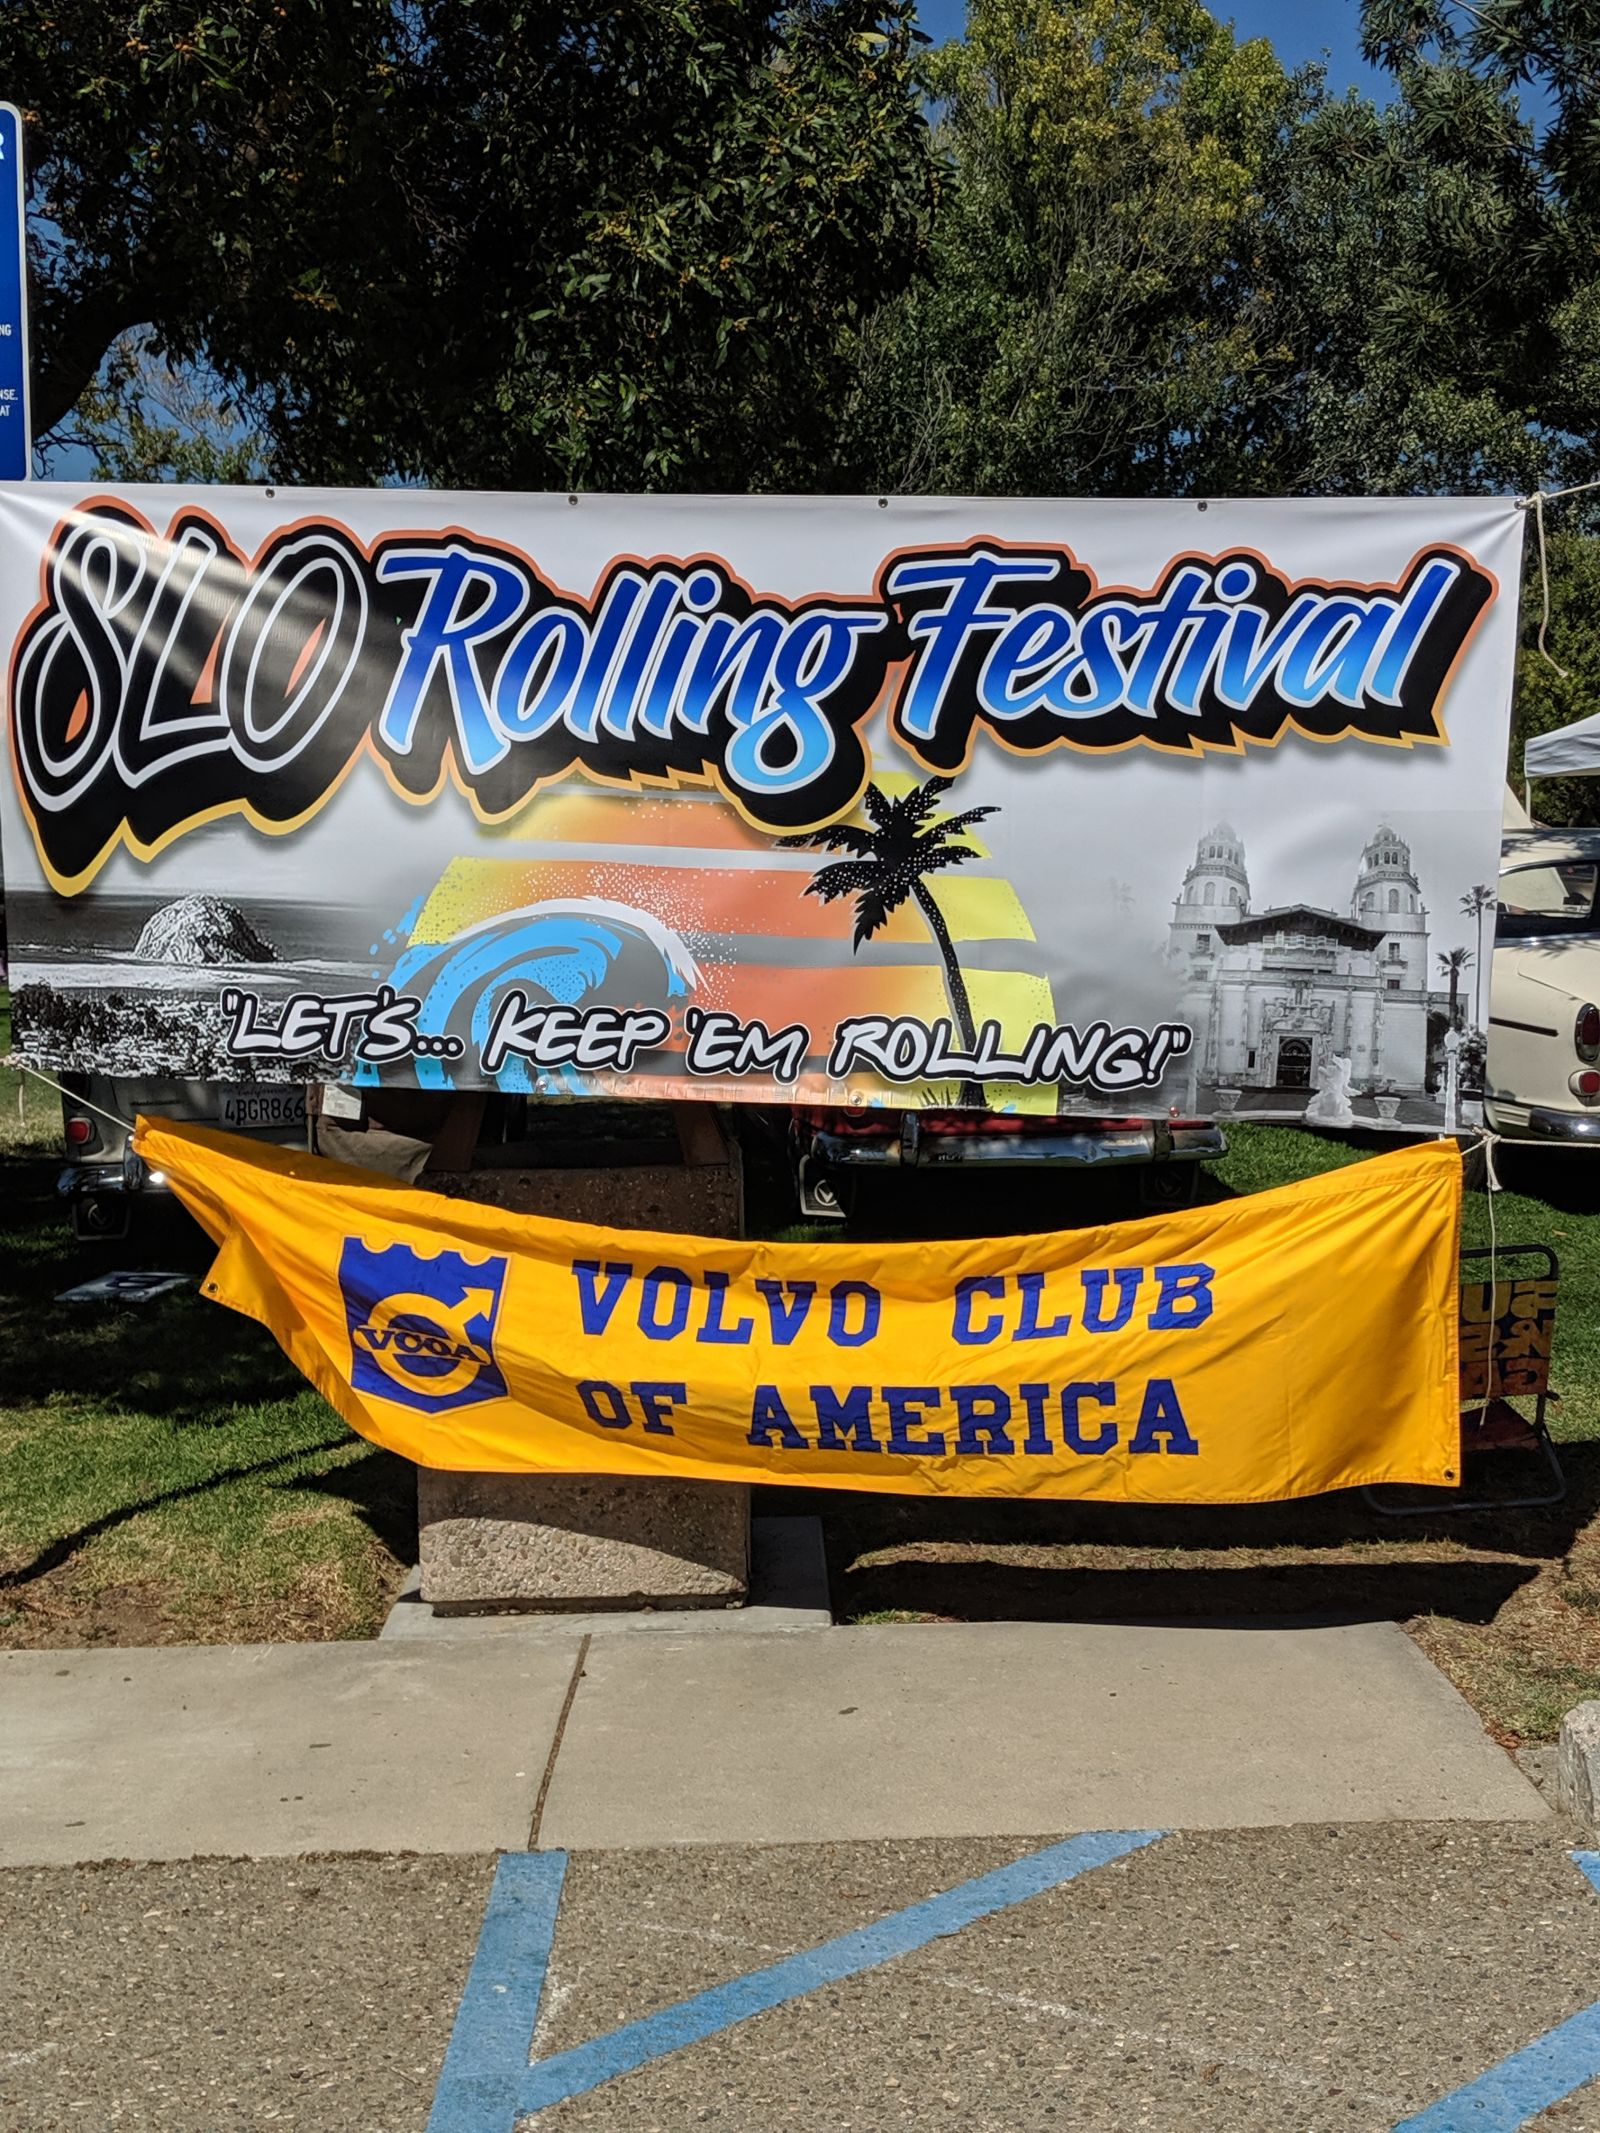 Illustration for article titled Volvo Club of America National/SLORolling Festival 2019 Photodump